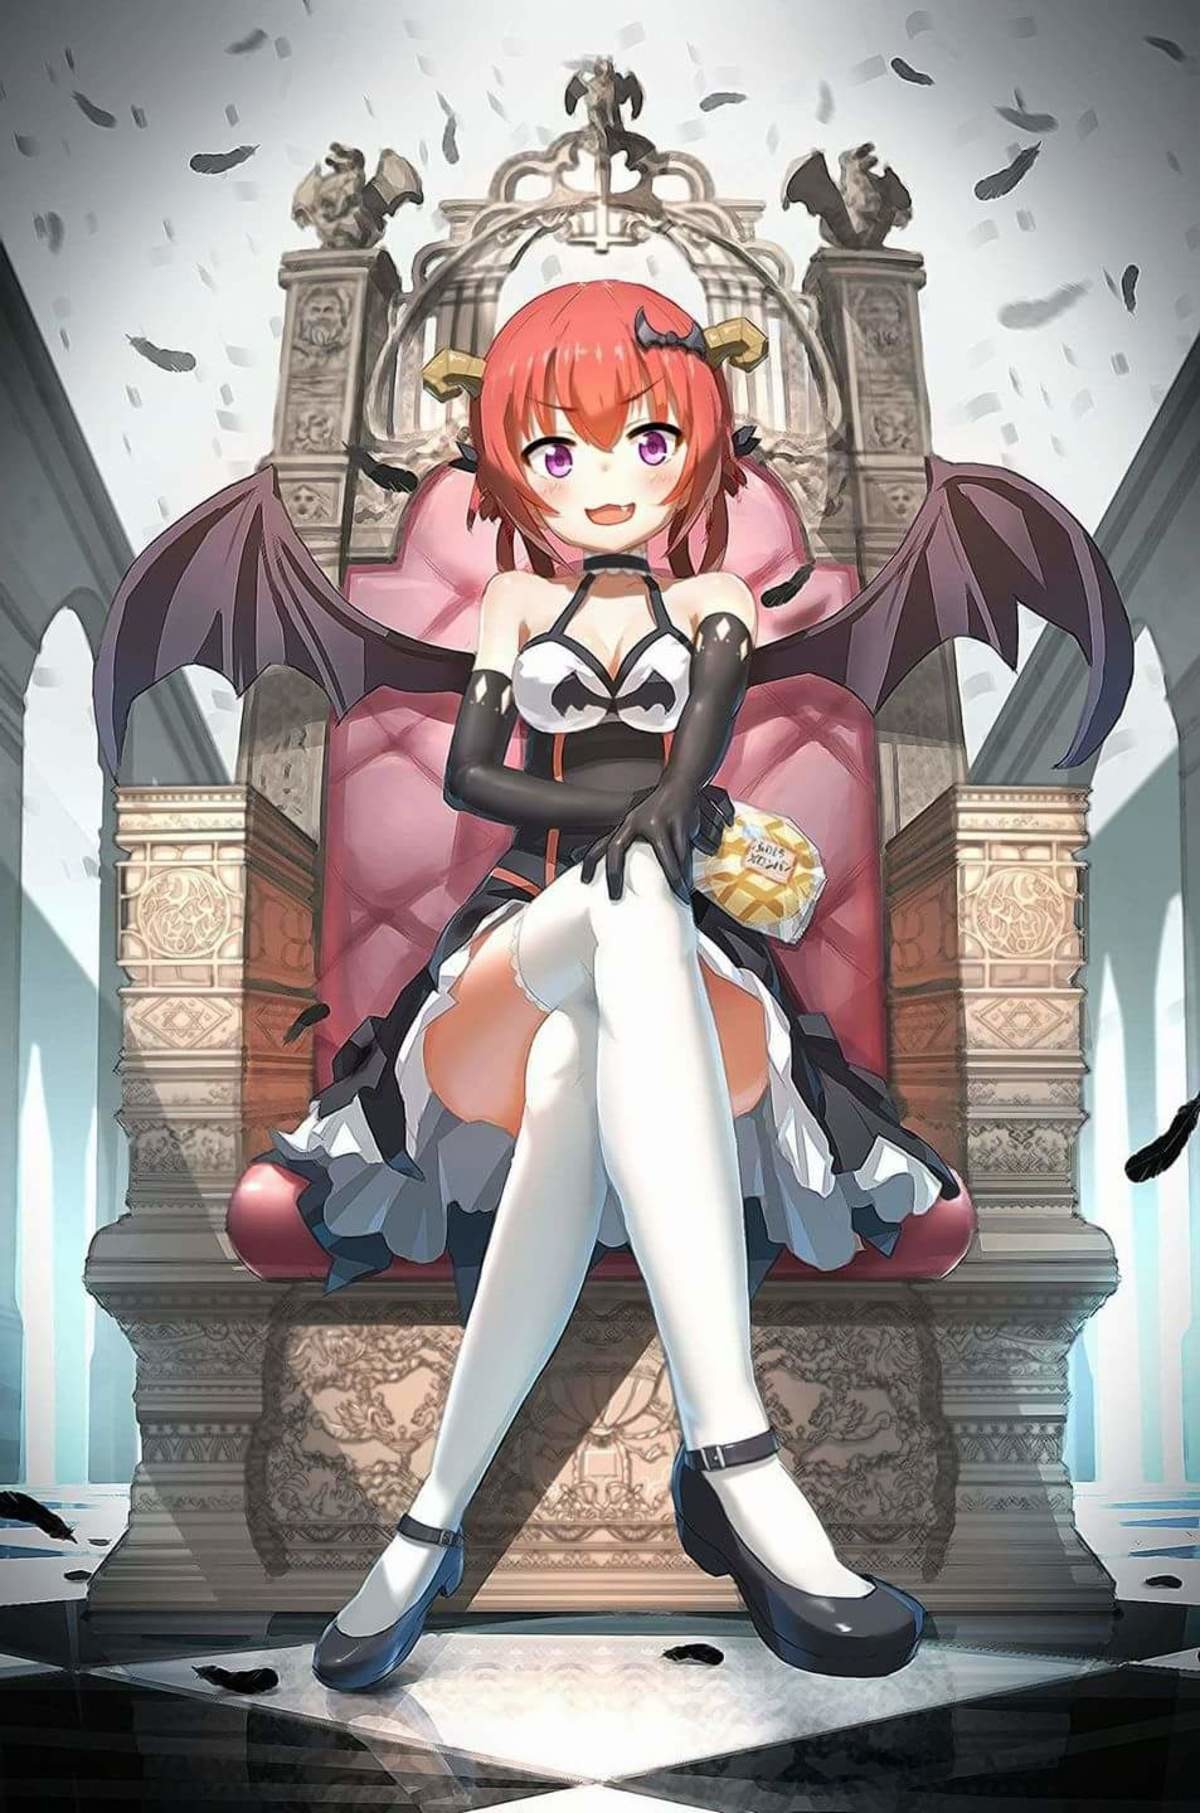 The queen of hell